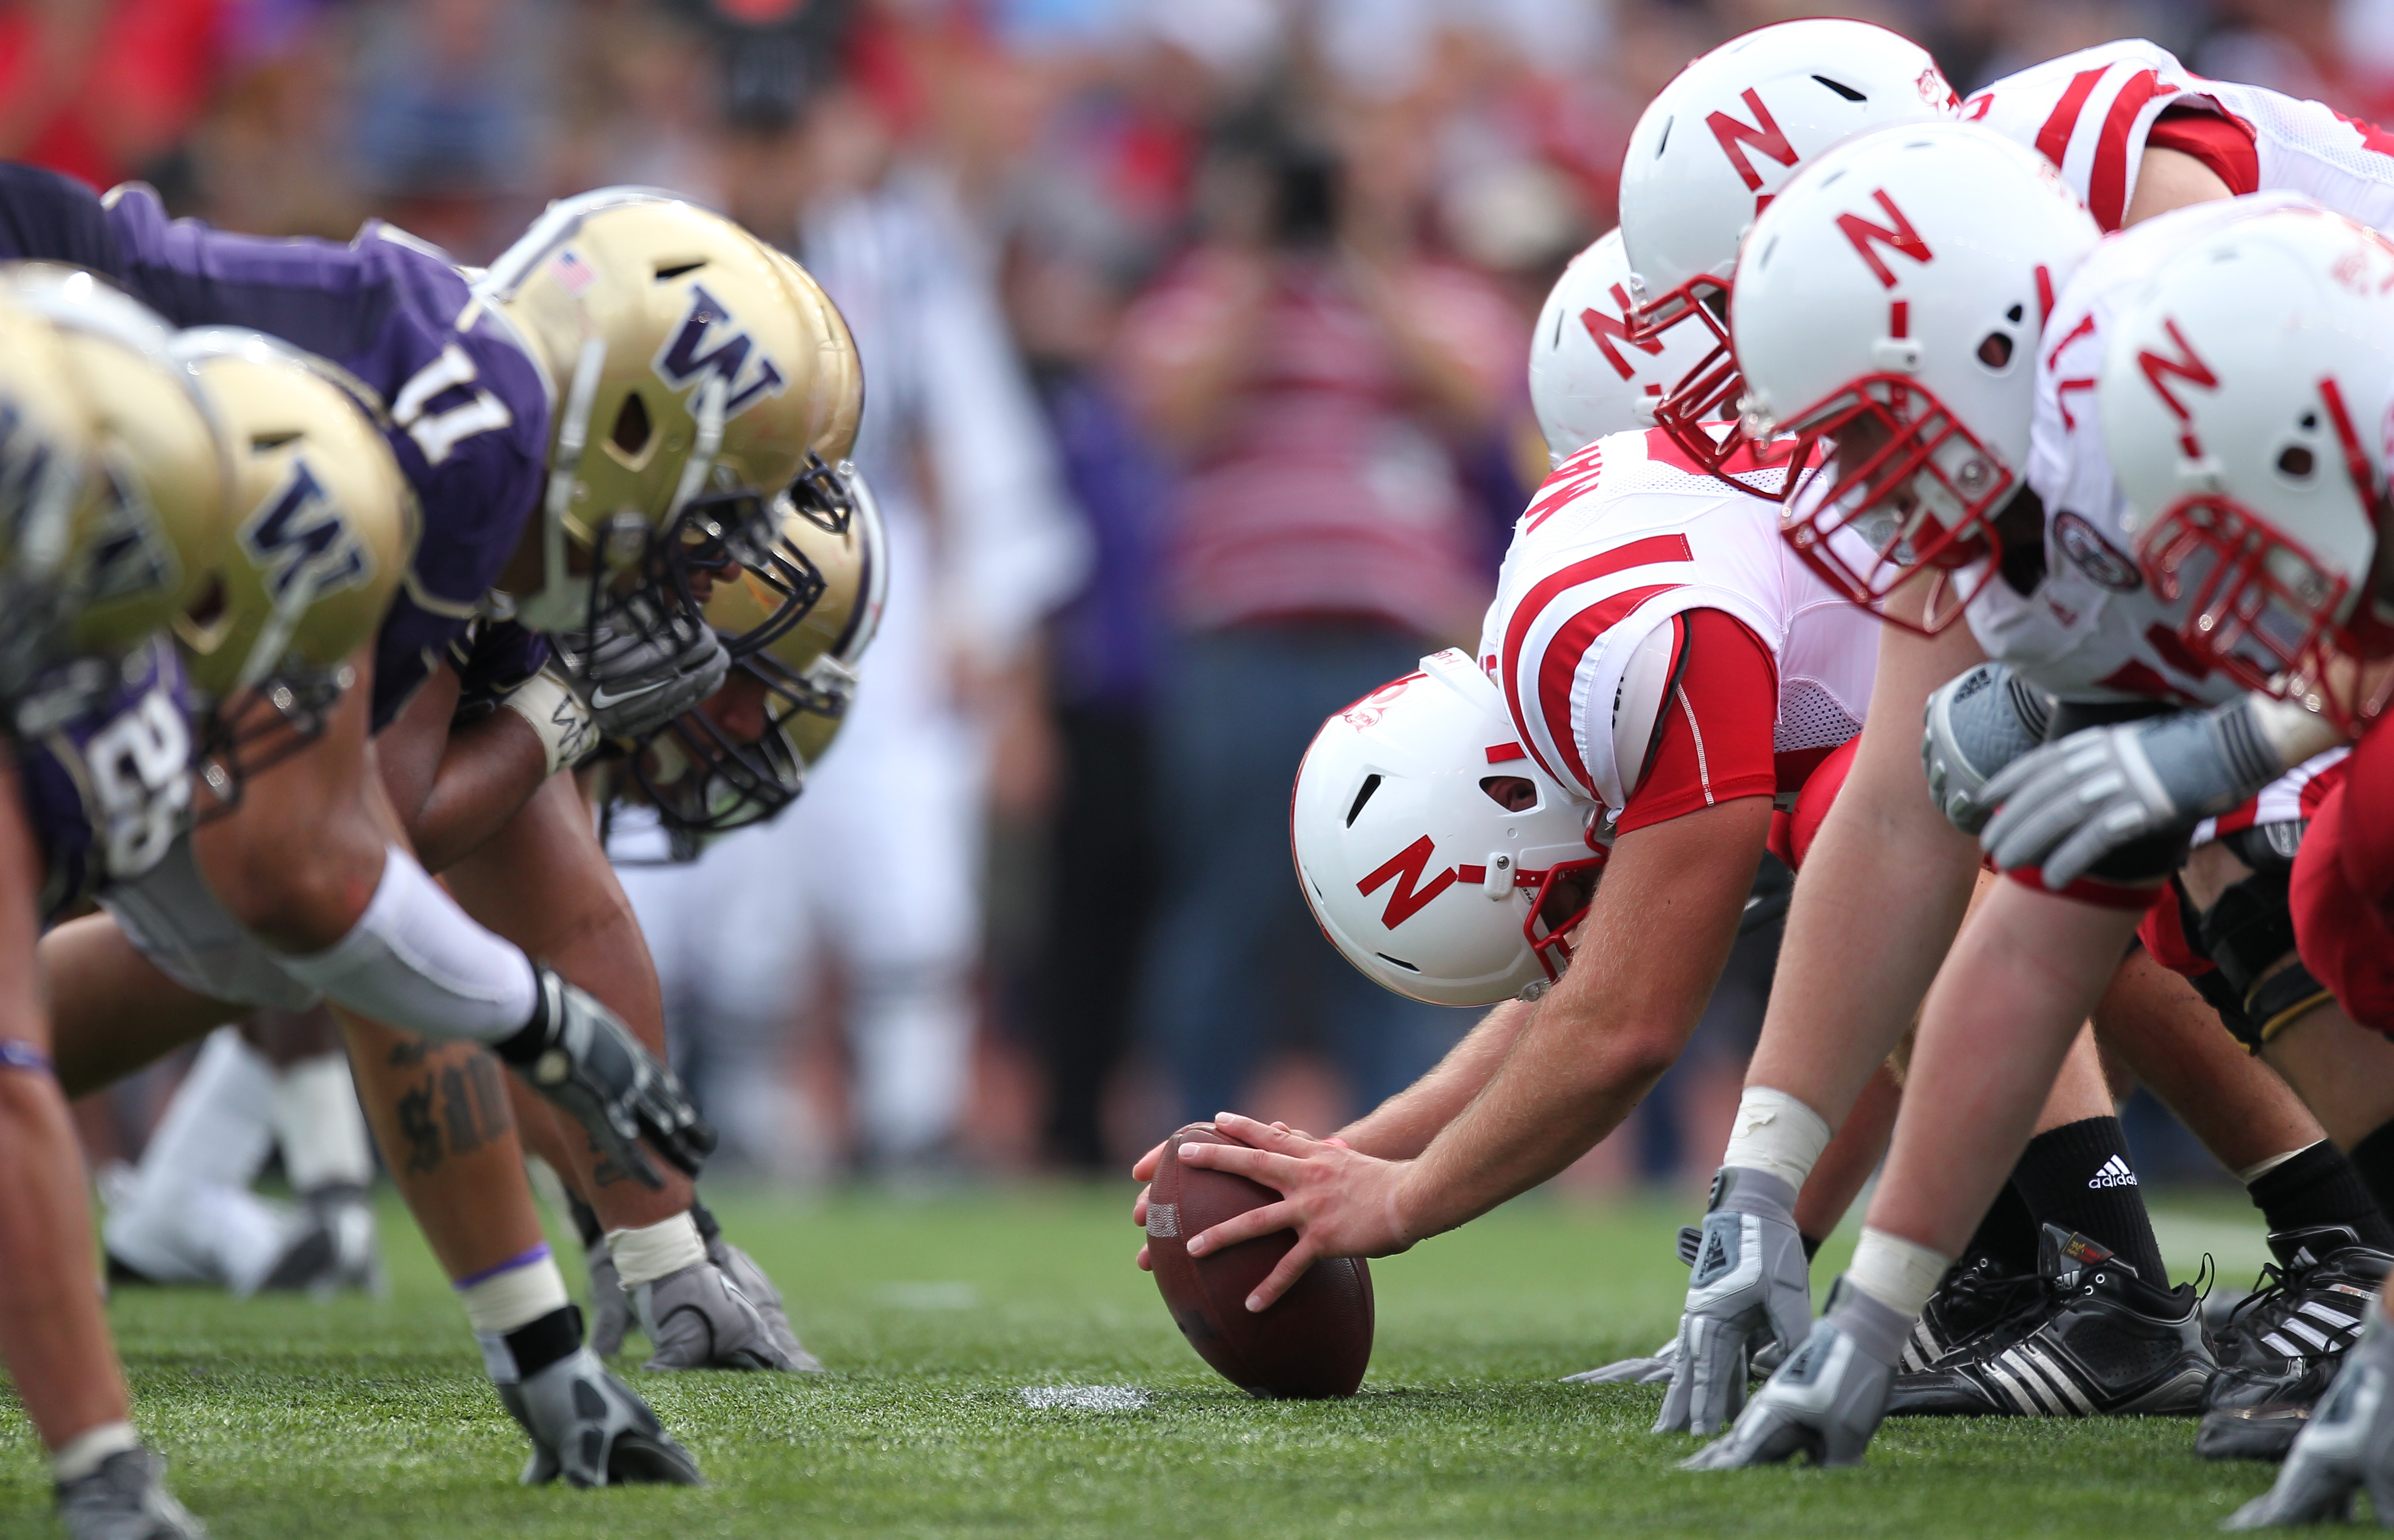 SEATTLE - SEPTEMBER 18: Long snapper P.J. Mangieri #92 of the Nebraska Cornhuskers prepares to snap the ball against the Washington Huskies on September 18, 2010 at Husky Stadium in Seattle, Washington. (Photo by Otto Greule Jr/Getty Images)